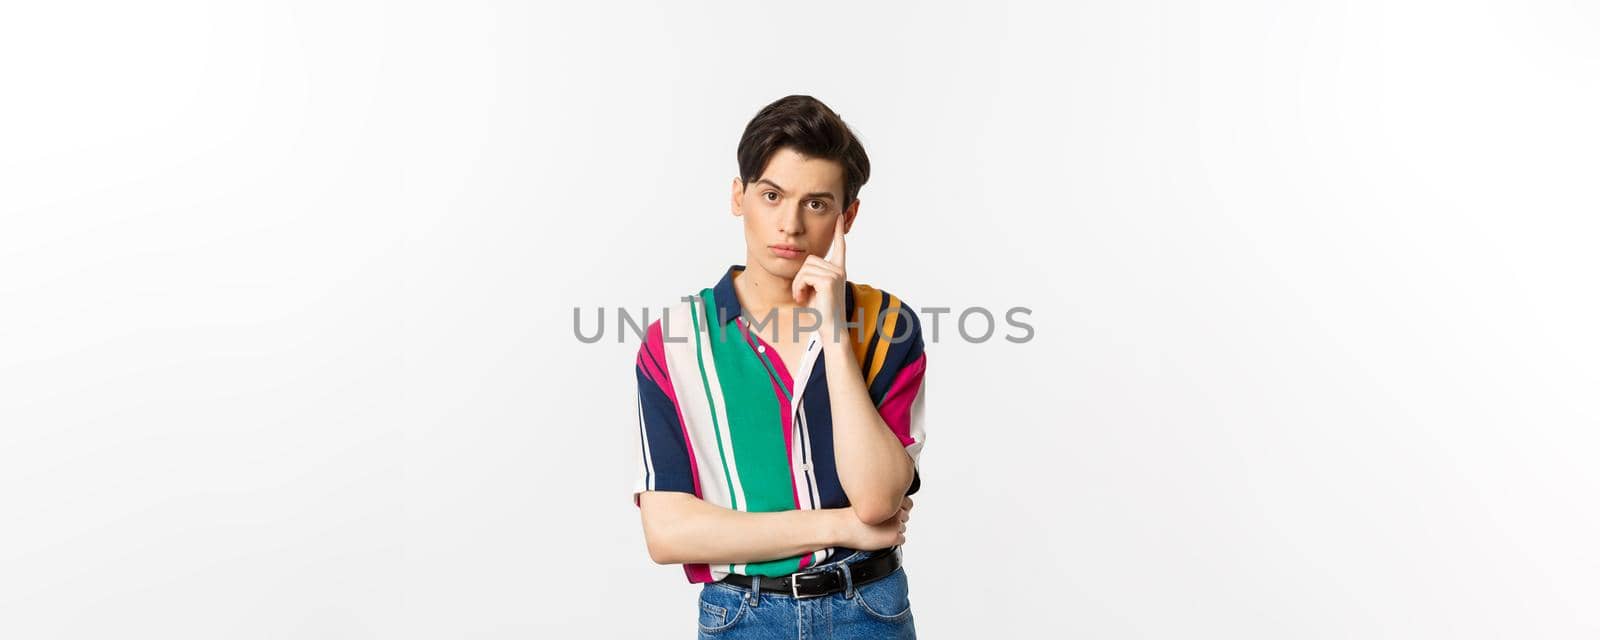 Image of attractive young man staring at camera with reluctant and annoyed emotion, standing over white background.